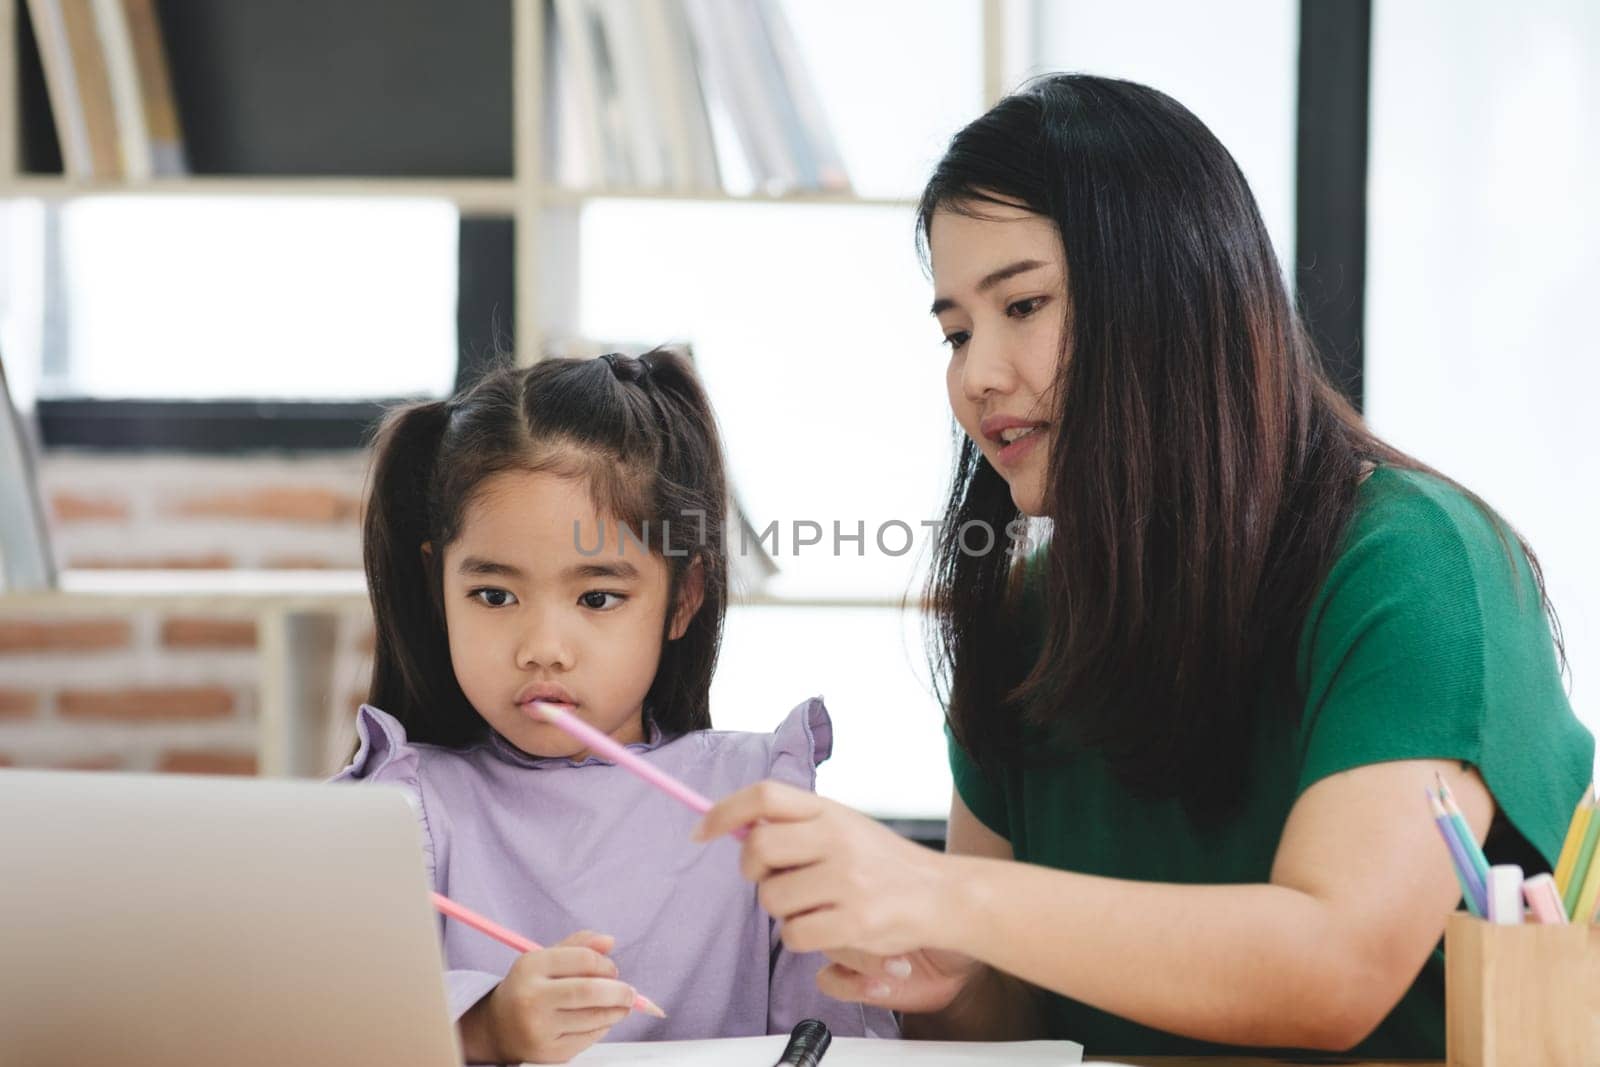 A woman is helping a young girl with her homework. The girl is using a pencil and the woman is holding a pen. The scene is set in a room with a lot of books and a laptop